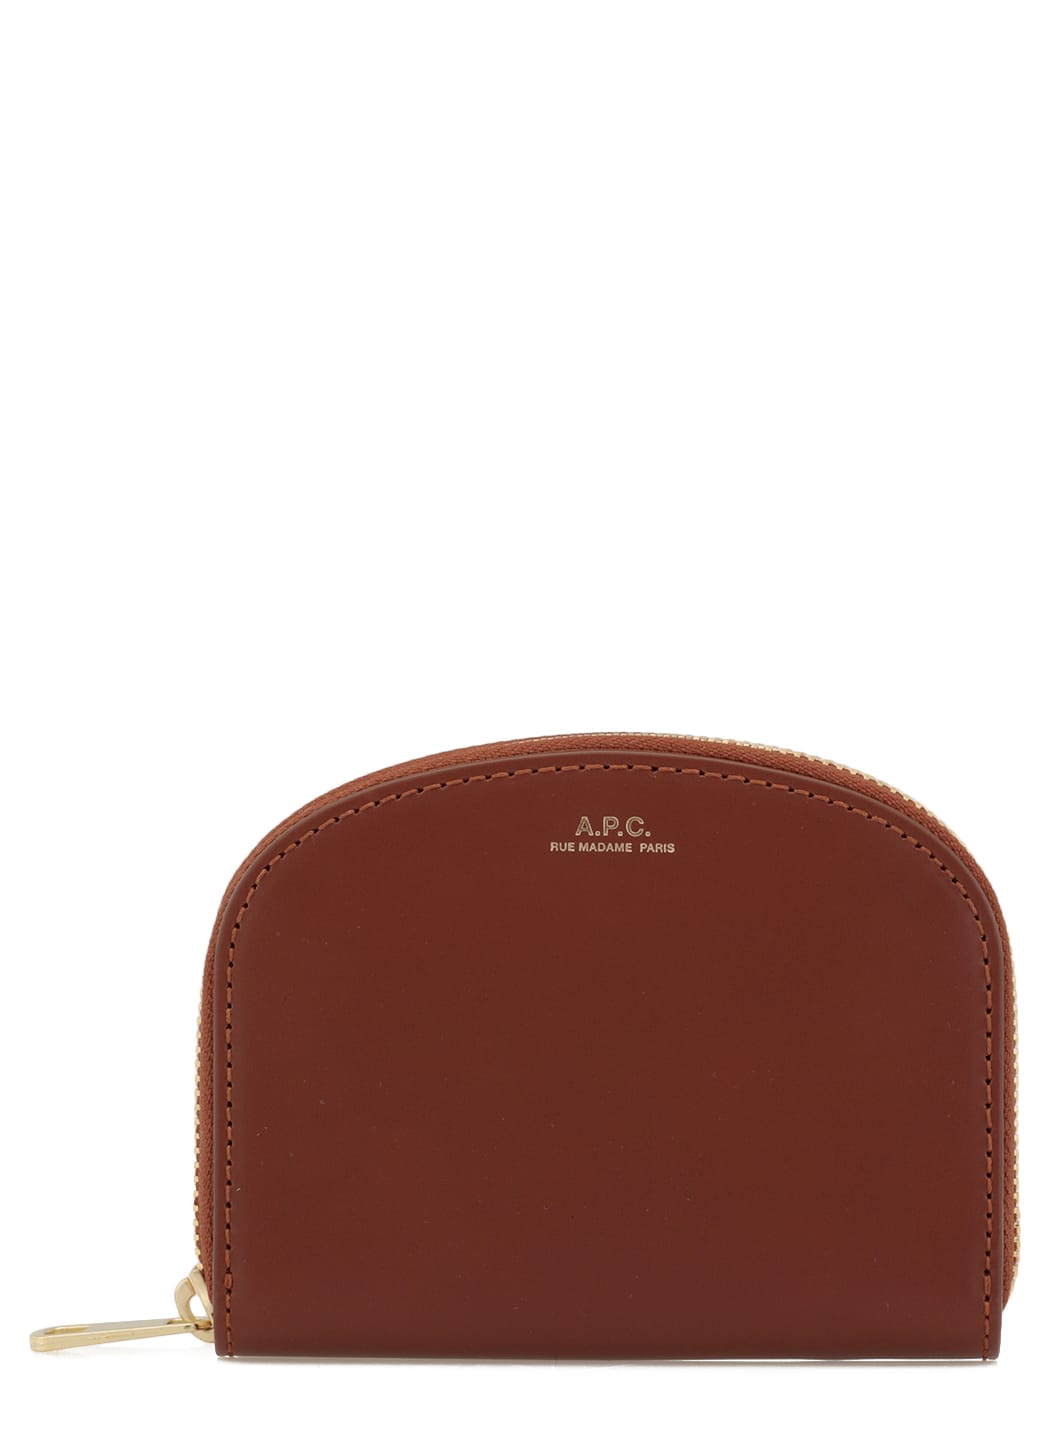 A.p.c. Leather Card Holder In Noisette